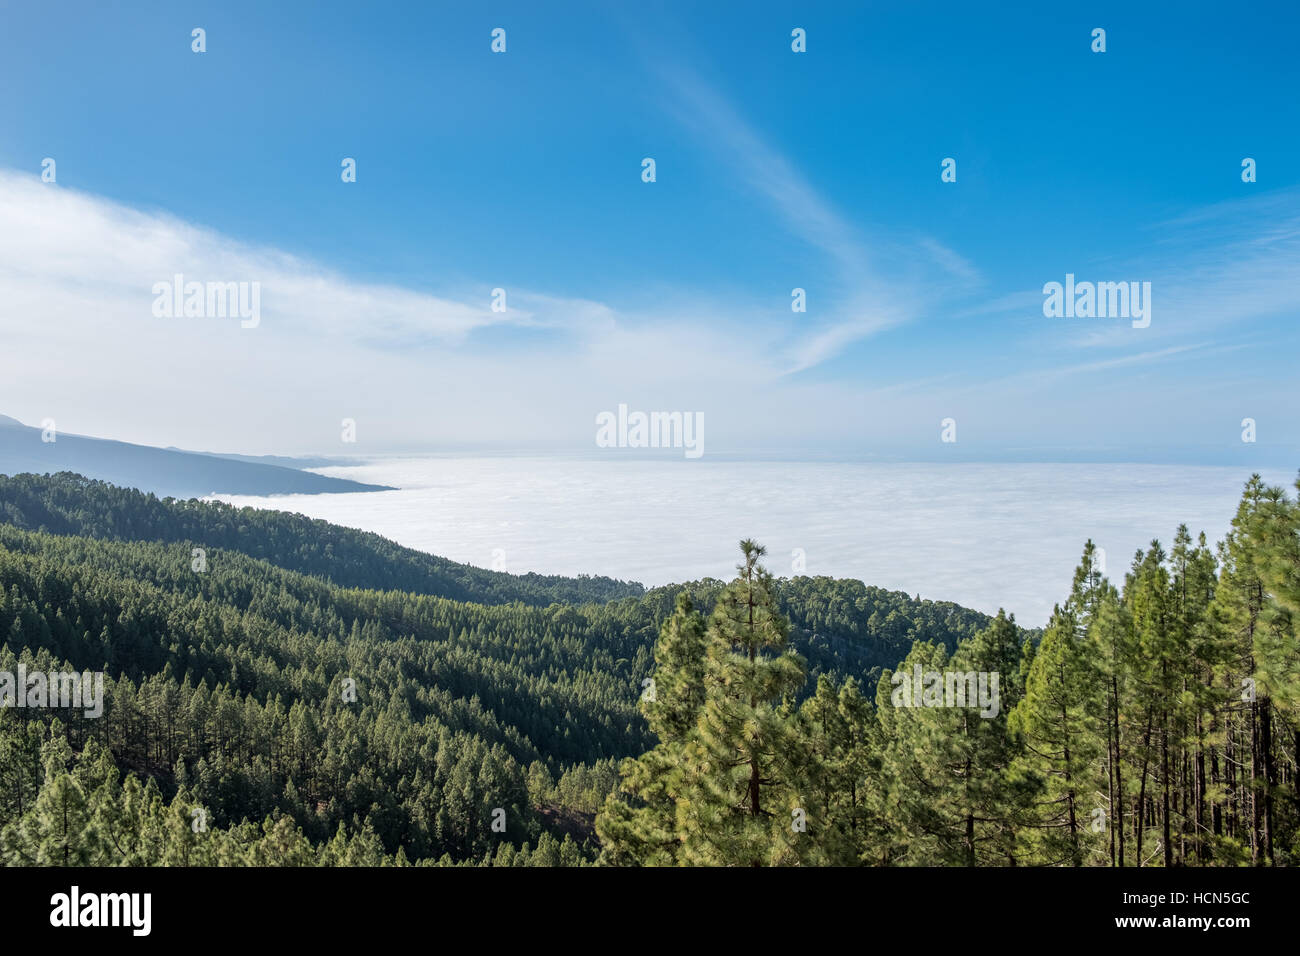 Coniferous forest  in mountain landscape over clouds Stock Photo